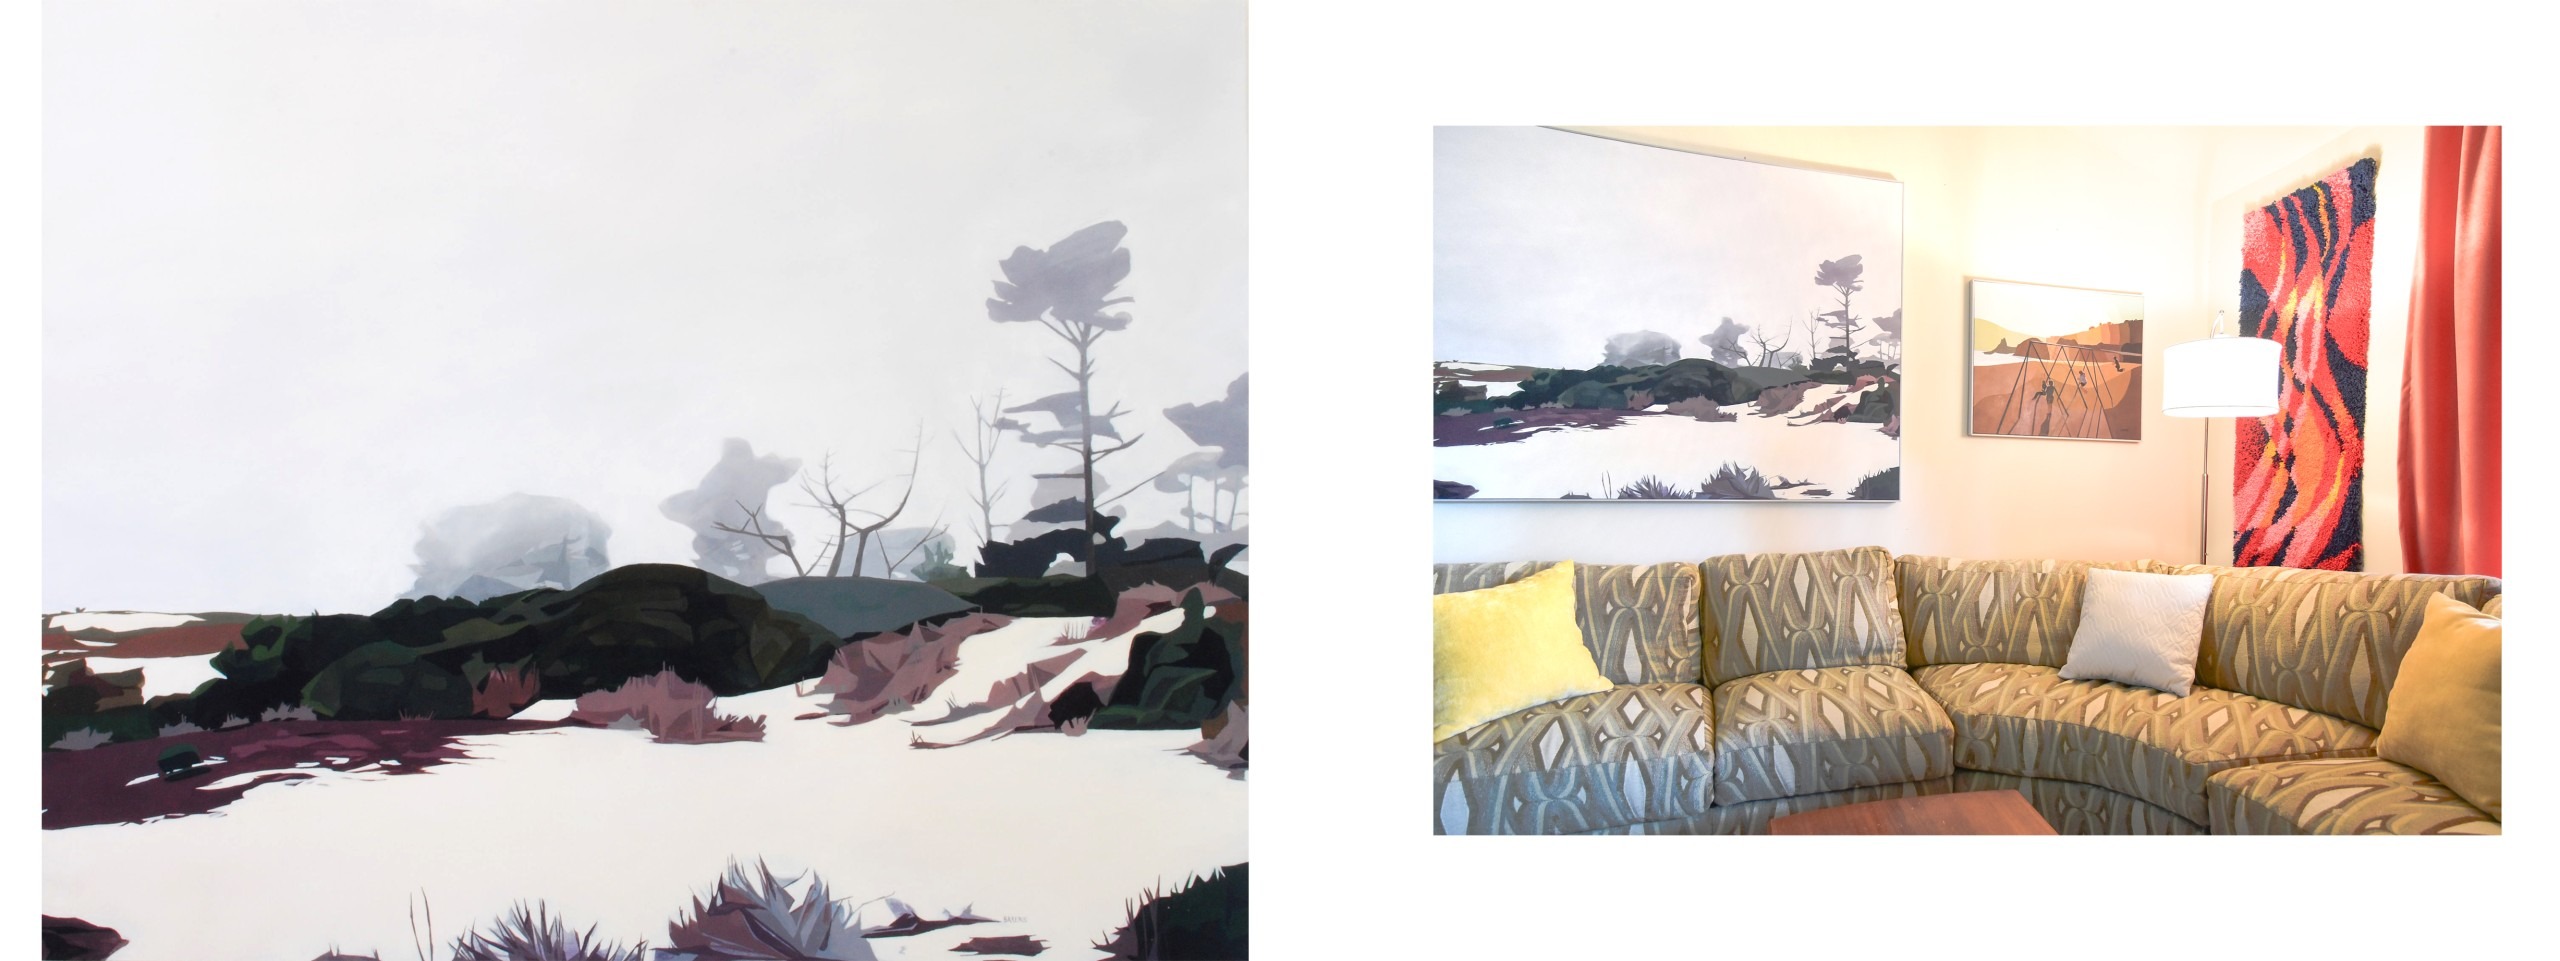 The painting "Carmel" by Elizabeth Barenis depicts the sand and fog along the coast of the quiet California town. To the right, an image is shown of the painting hanging in the artist's living room.